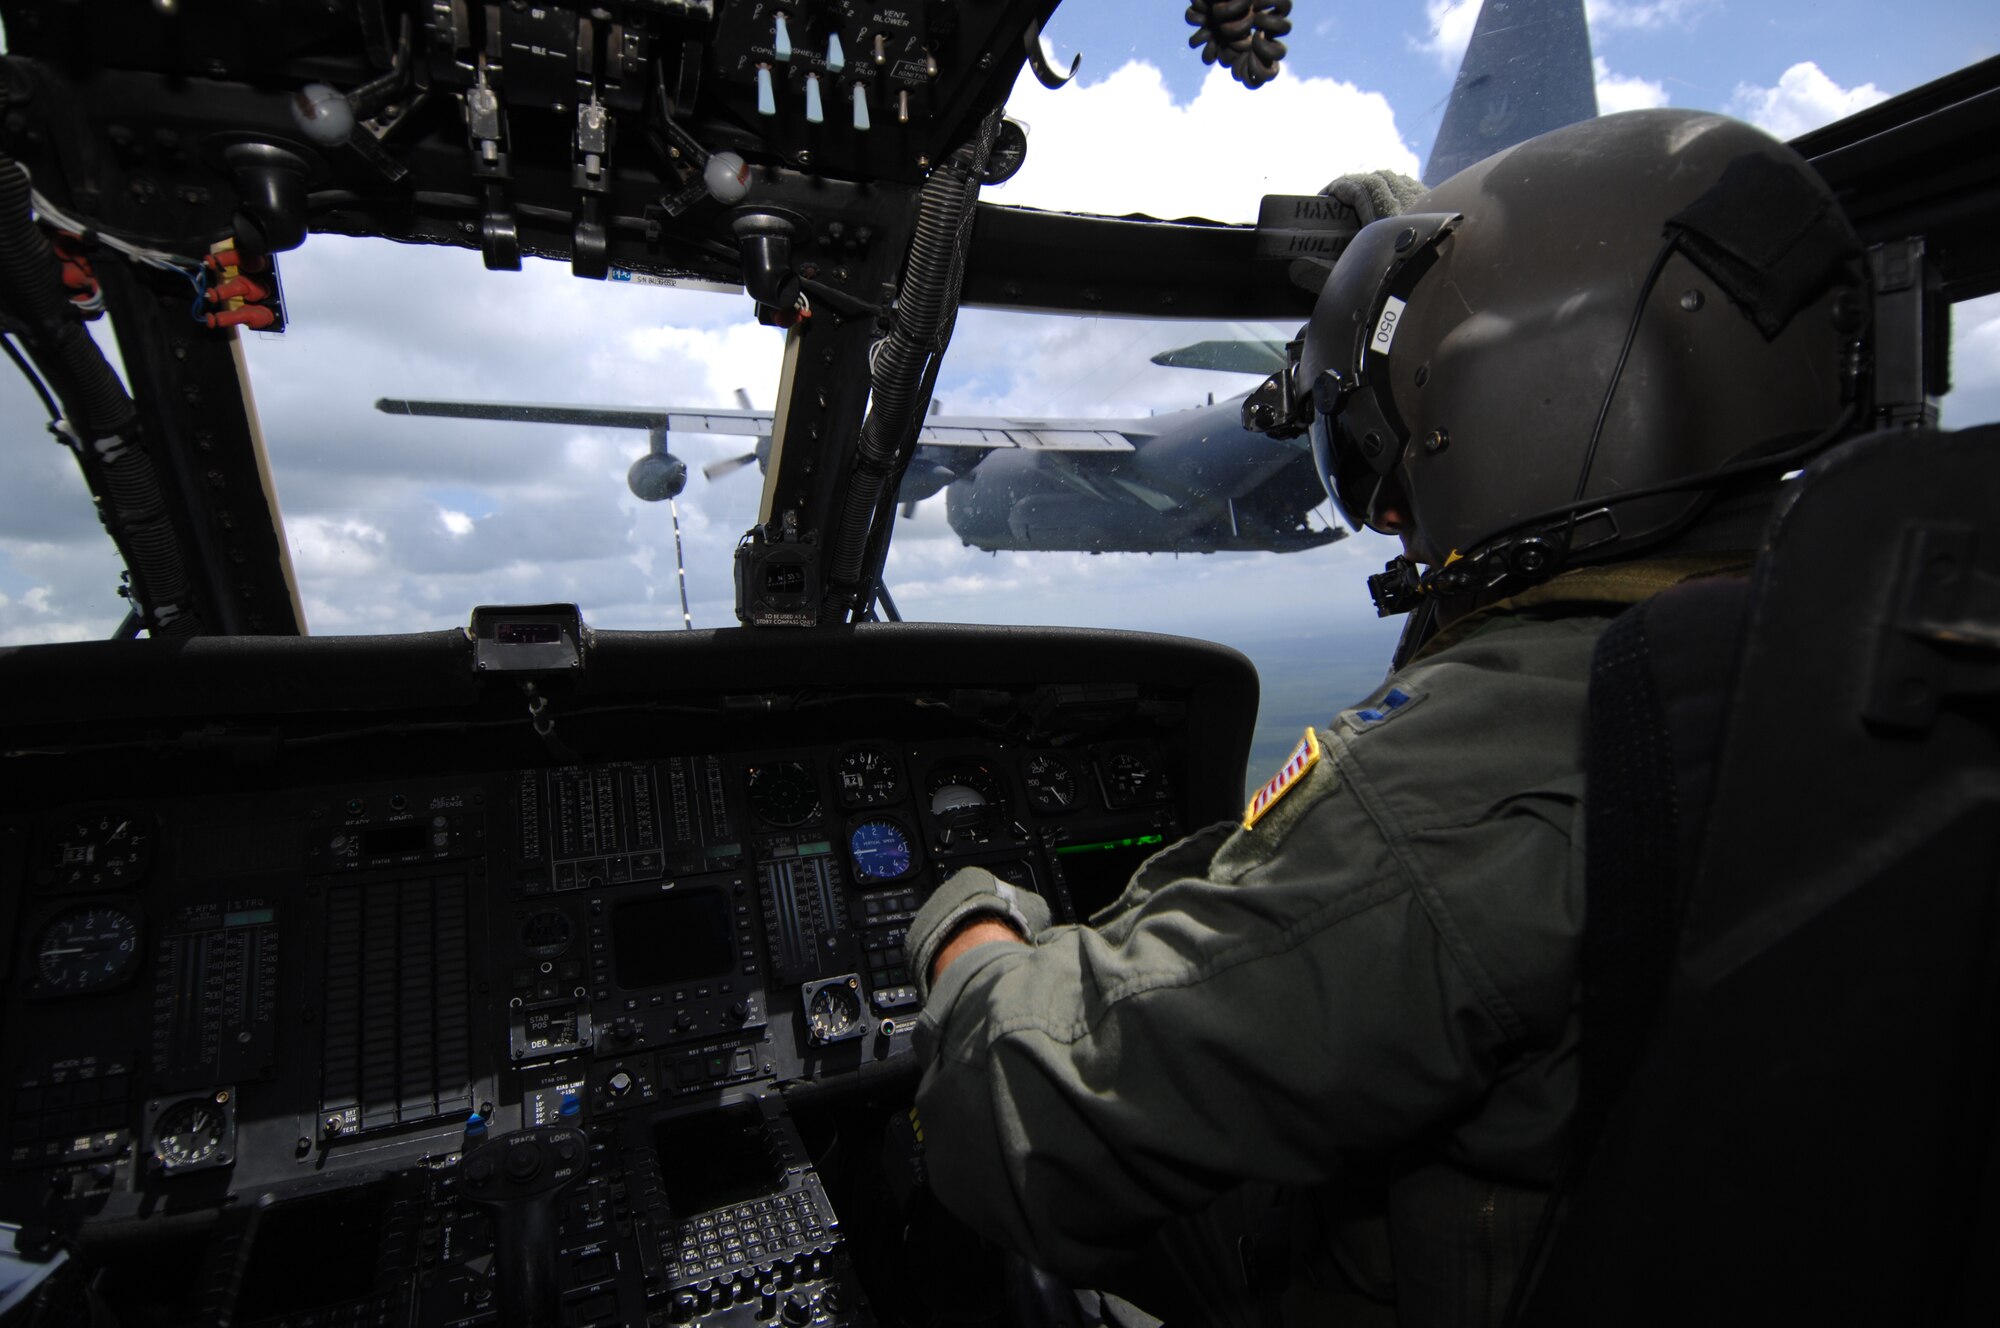 Capt. Jason Chambers, 41st Rescue Squadron HH-60G Pave Hawk mission pilot, monitors his flight instruments during an aerial refueling mission with an HC-130P assigned to the 71st RQS, June 27. A video production company visited Moody Air Force Base, Ga., to film a spot for the U.S. Air Force recruiting campaign, "Do Something Amazing." (U.S. Air Force photo by Master Sgt. Scott Reed)